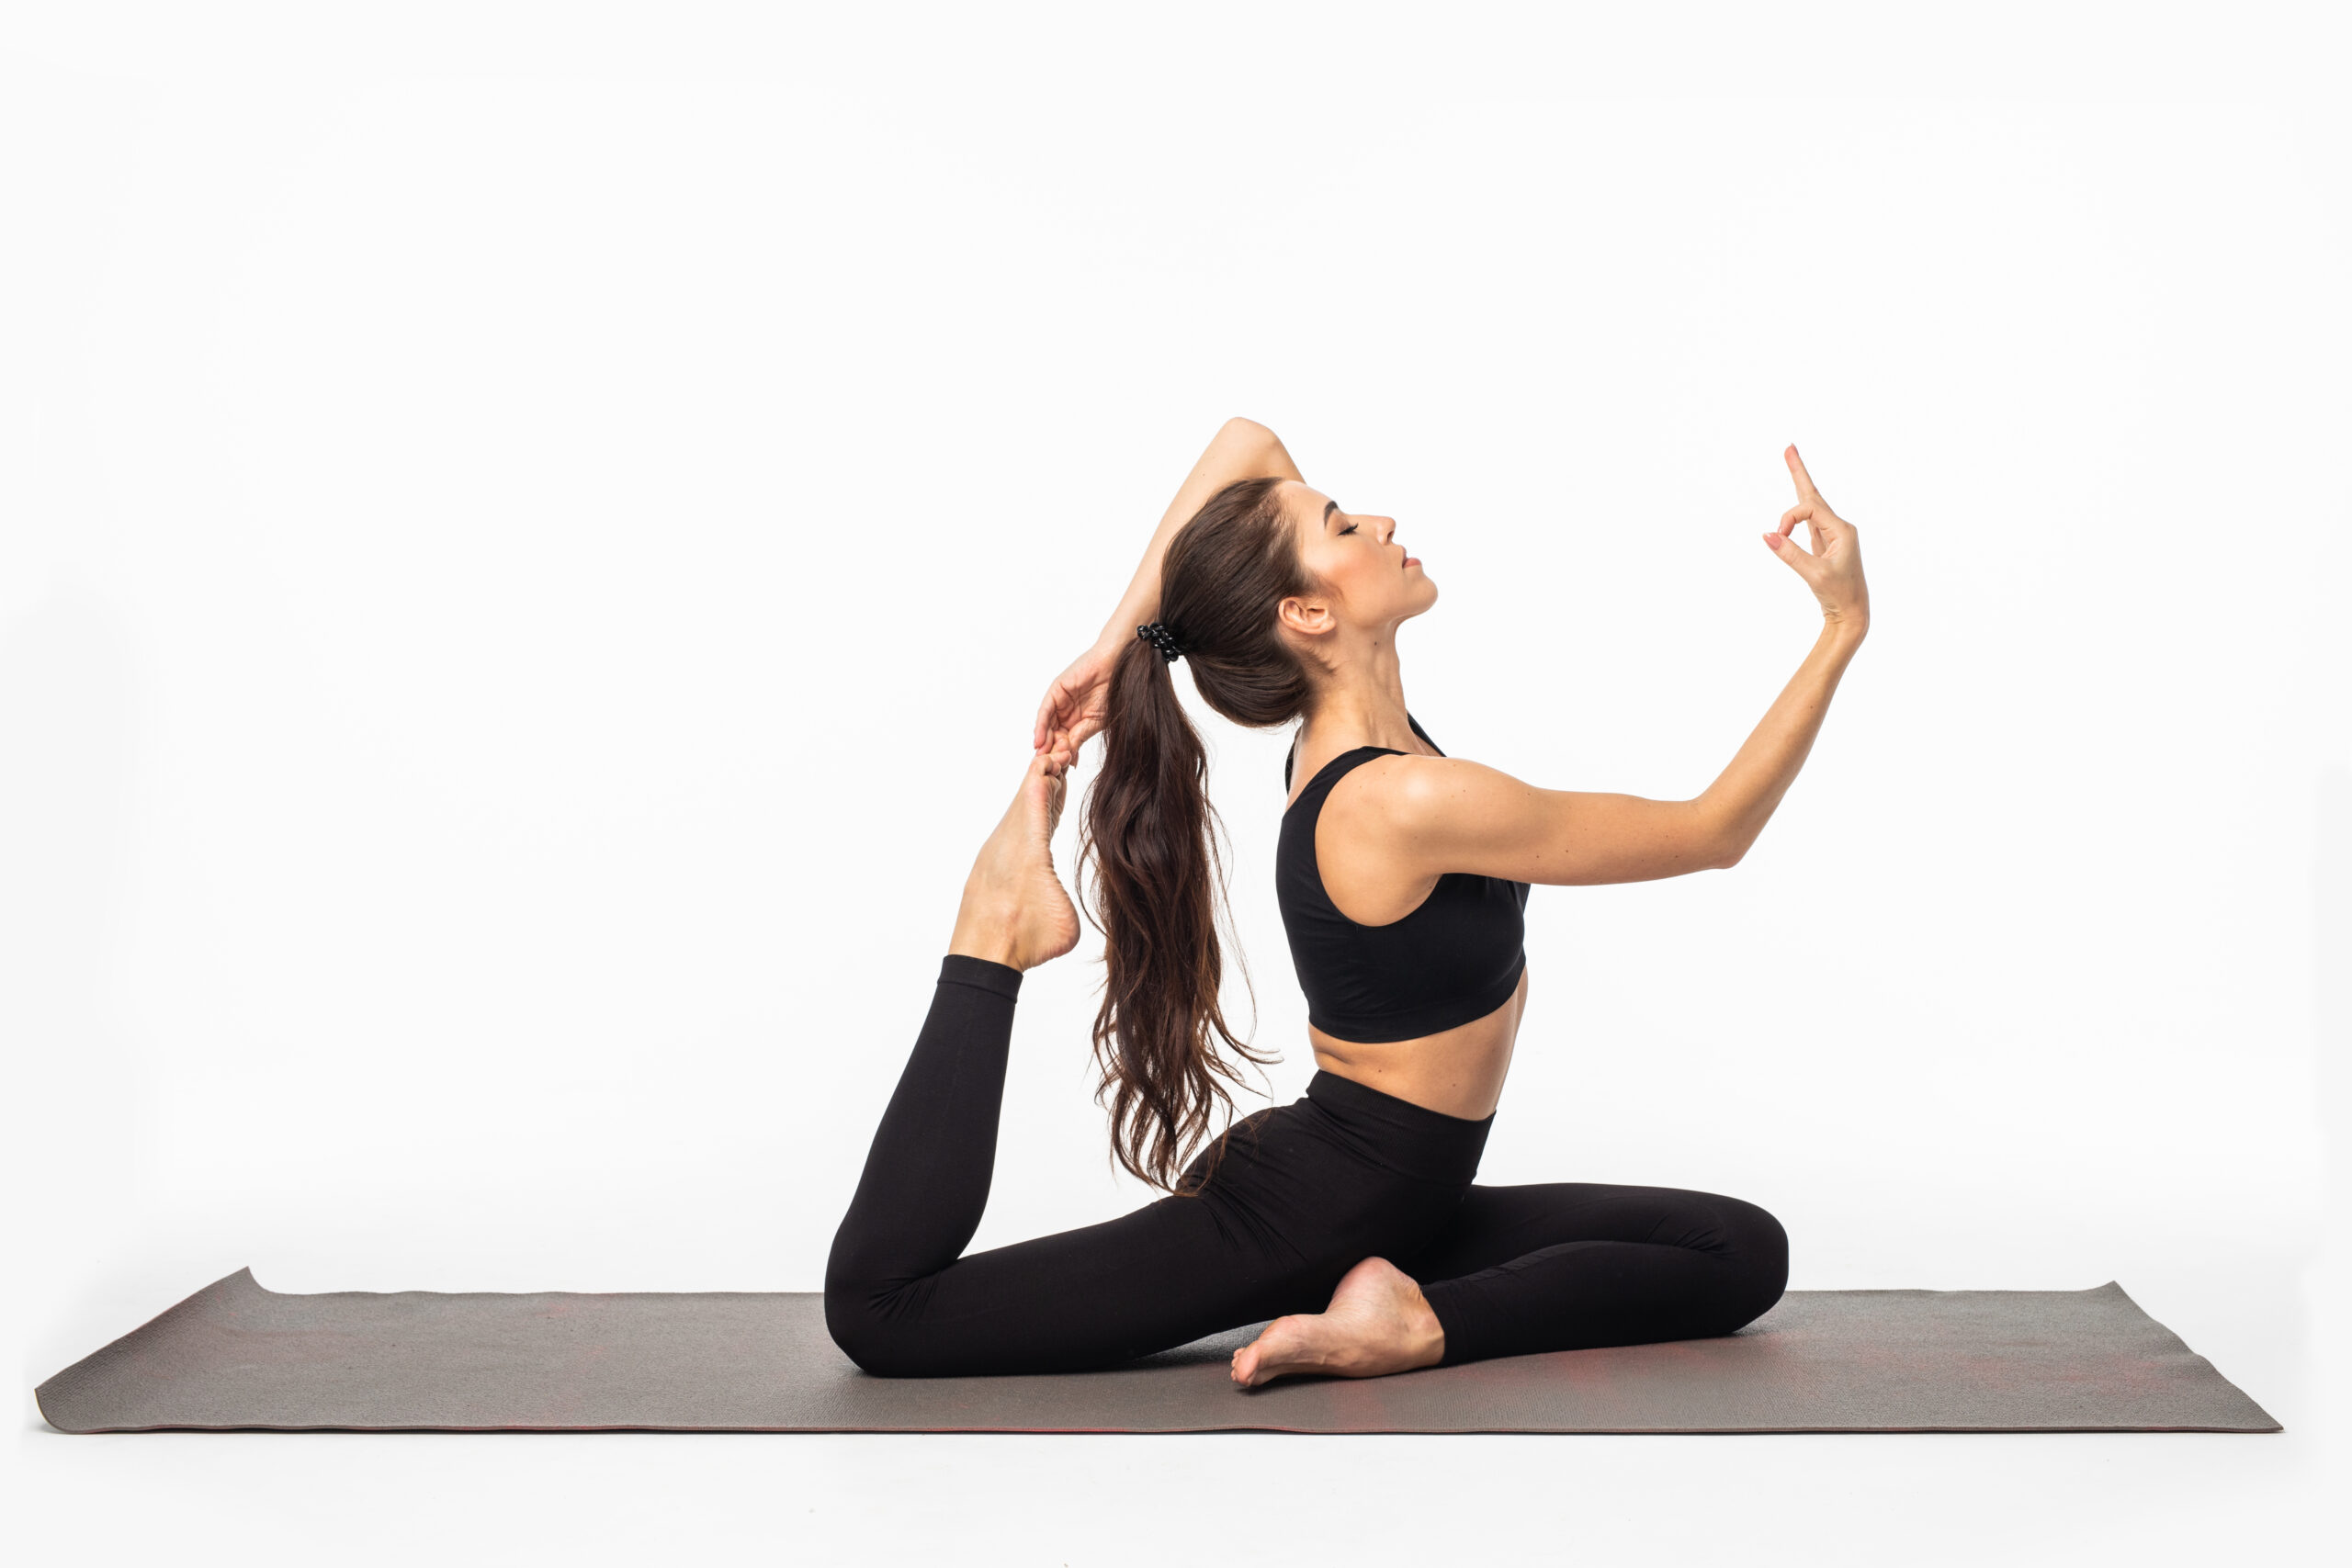 7 yoga poses to add to your practice if you have PCOS | Vogue India